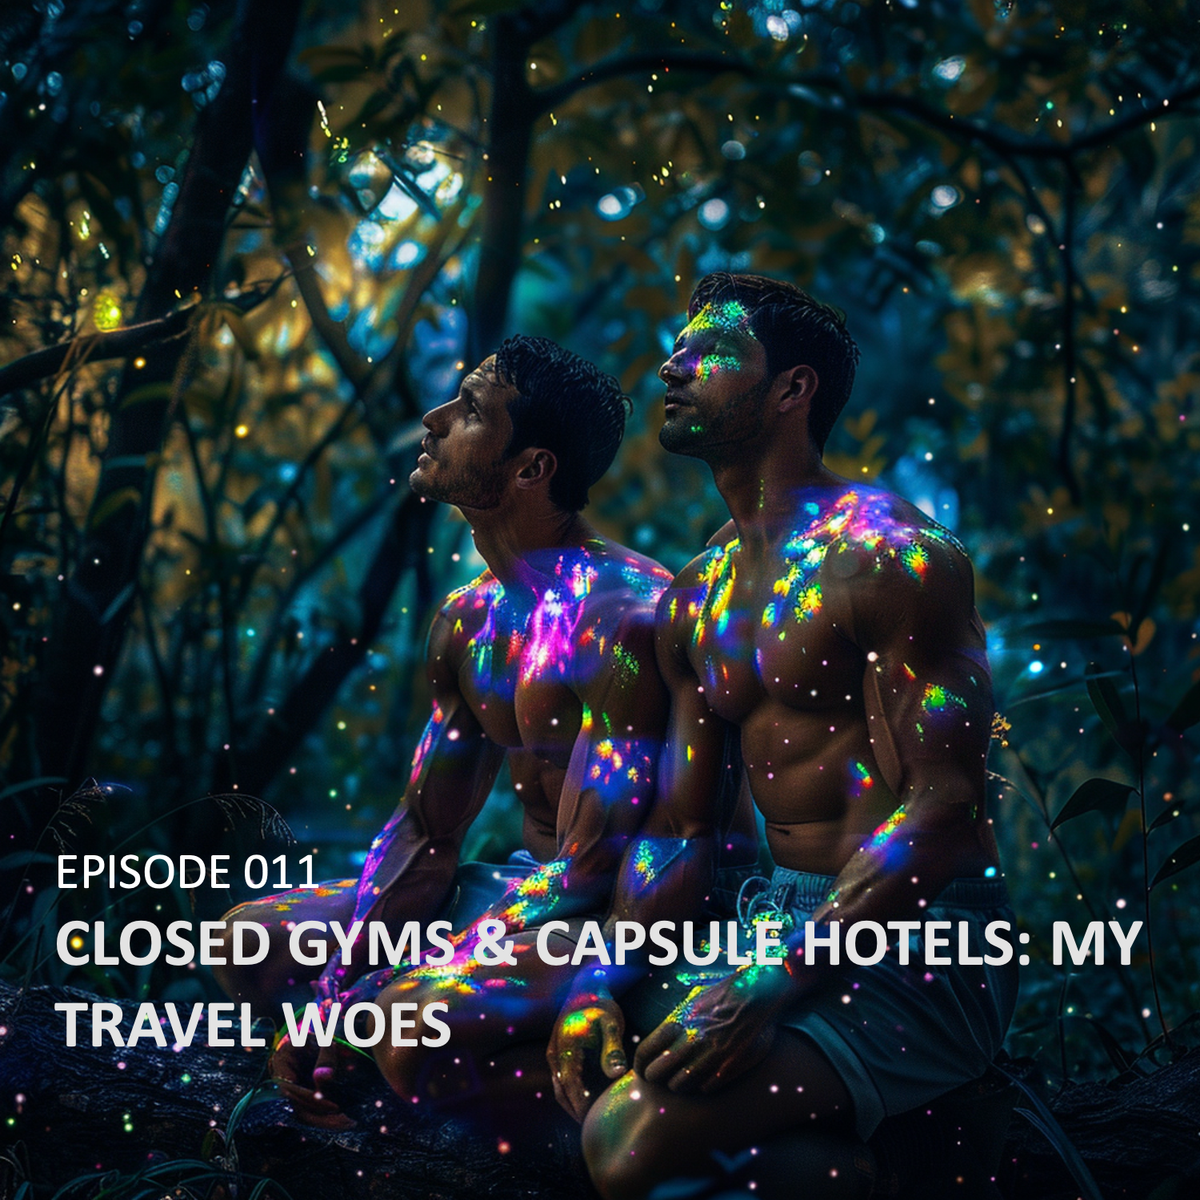 BrawnyAi's From Zero to Creator - Episode 011: Closed Gyms & Capsule Hotels: My Travel Woes